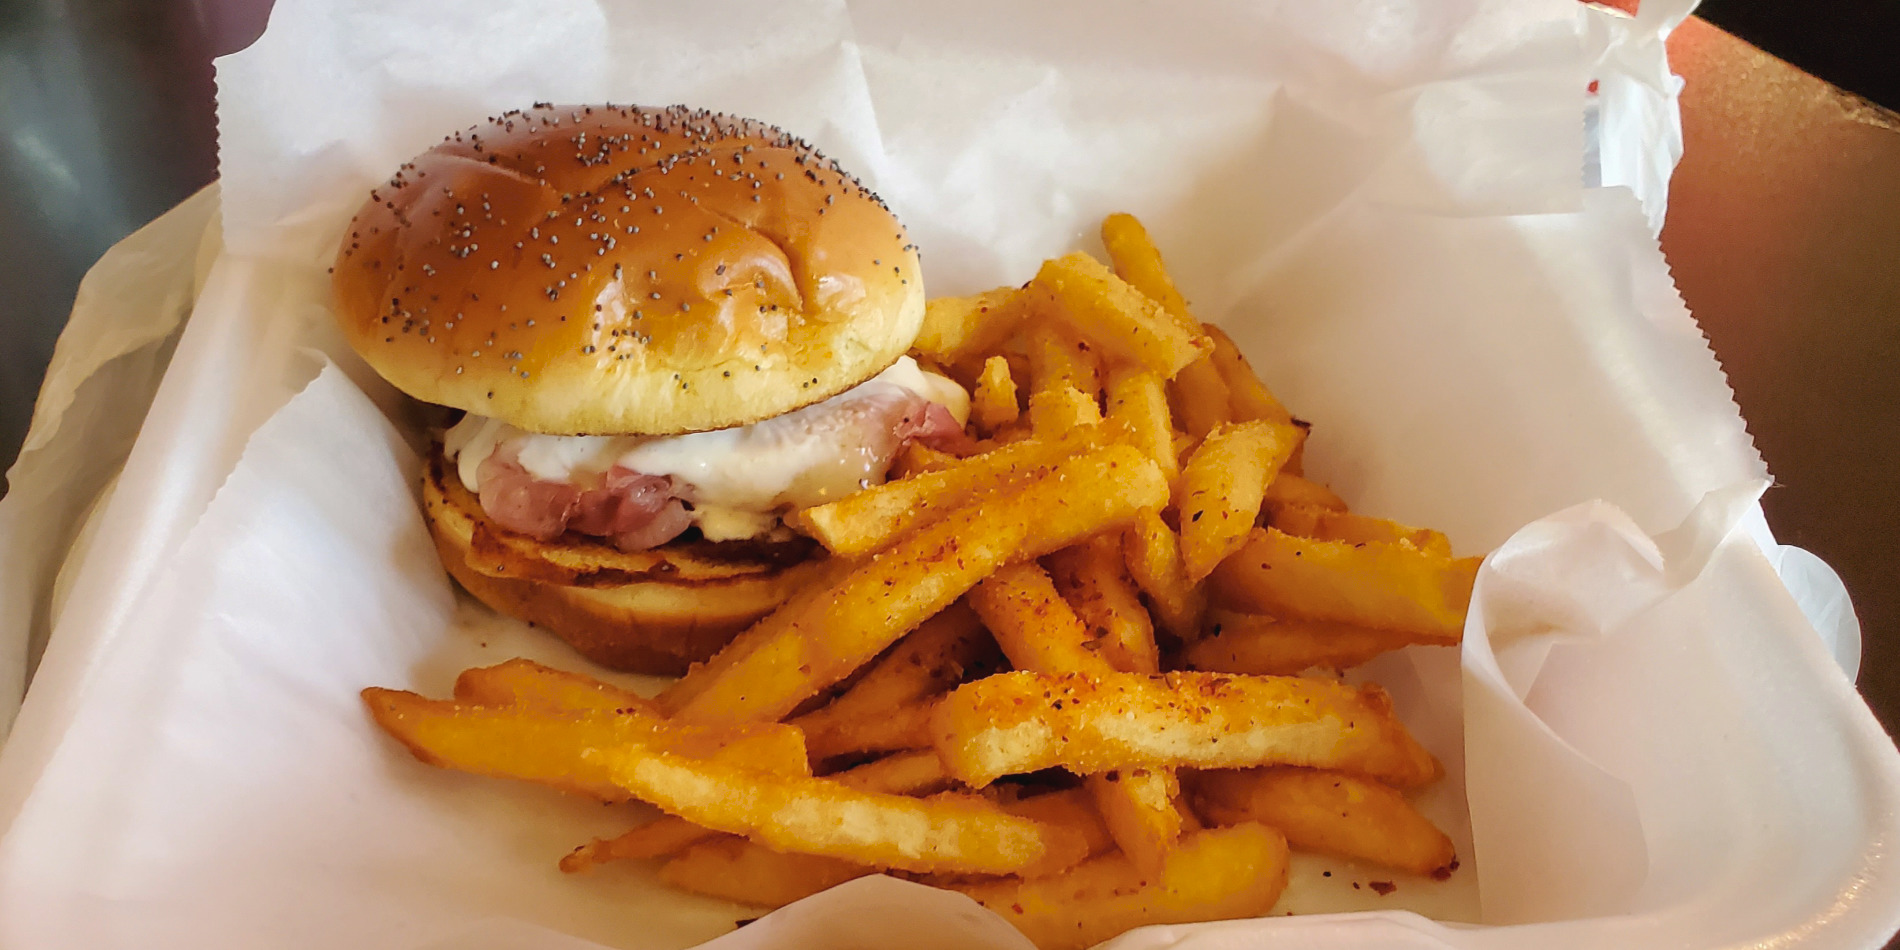 Pond Street's hot ham and cheese sandwich with seasoned fries in a parchment paper lined styrofoam container. Photo by Carl Busch.